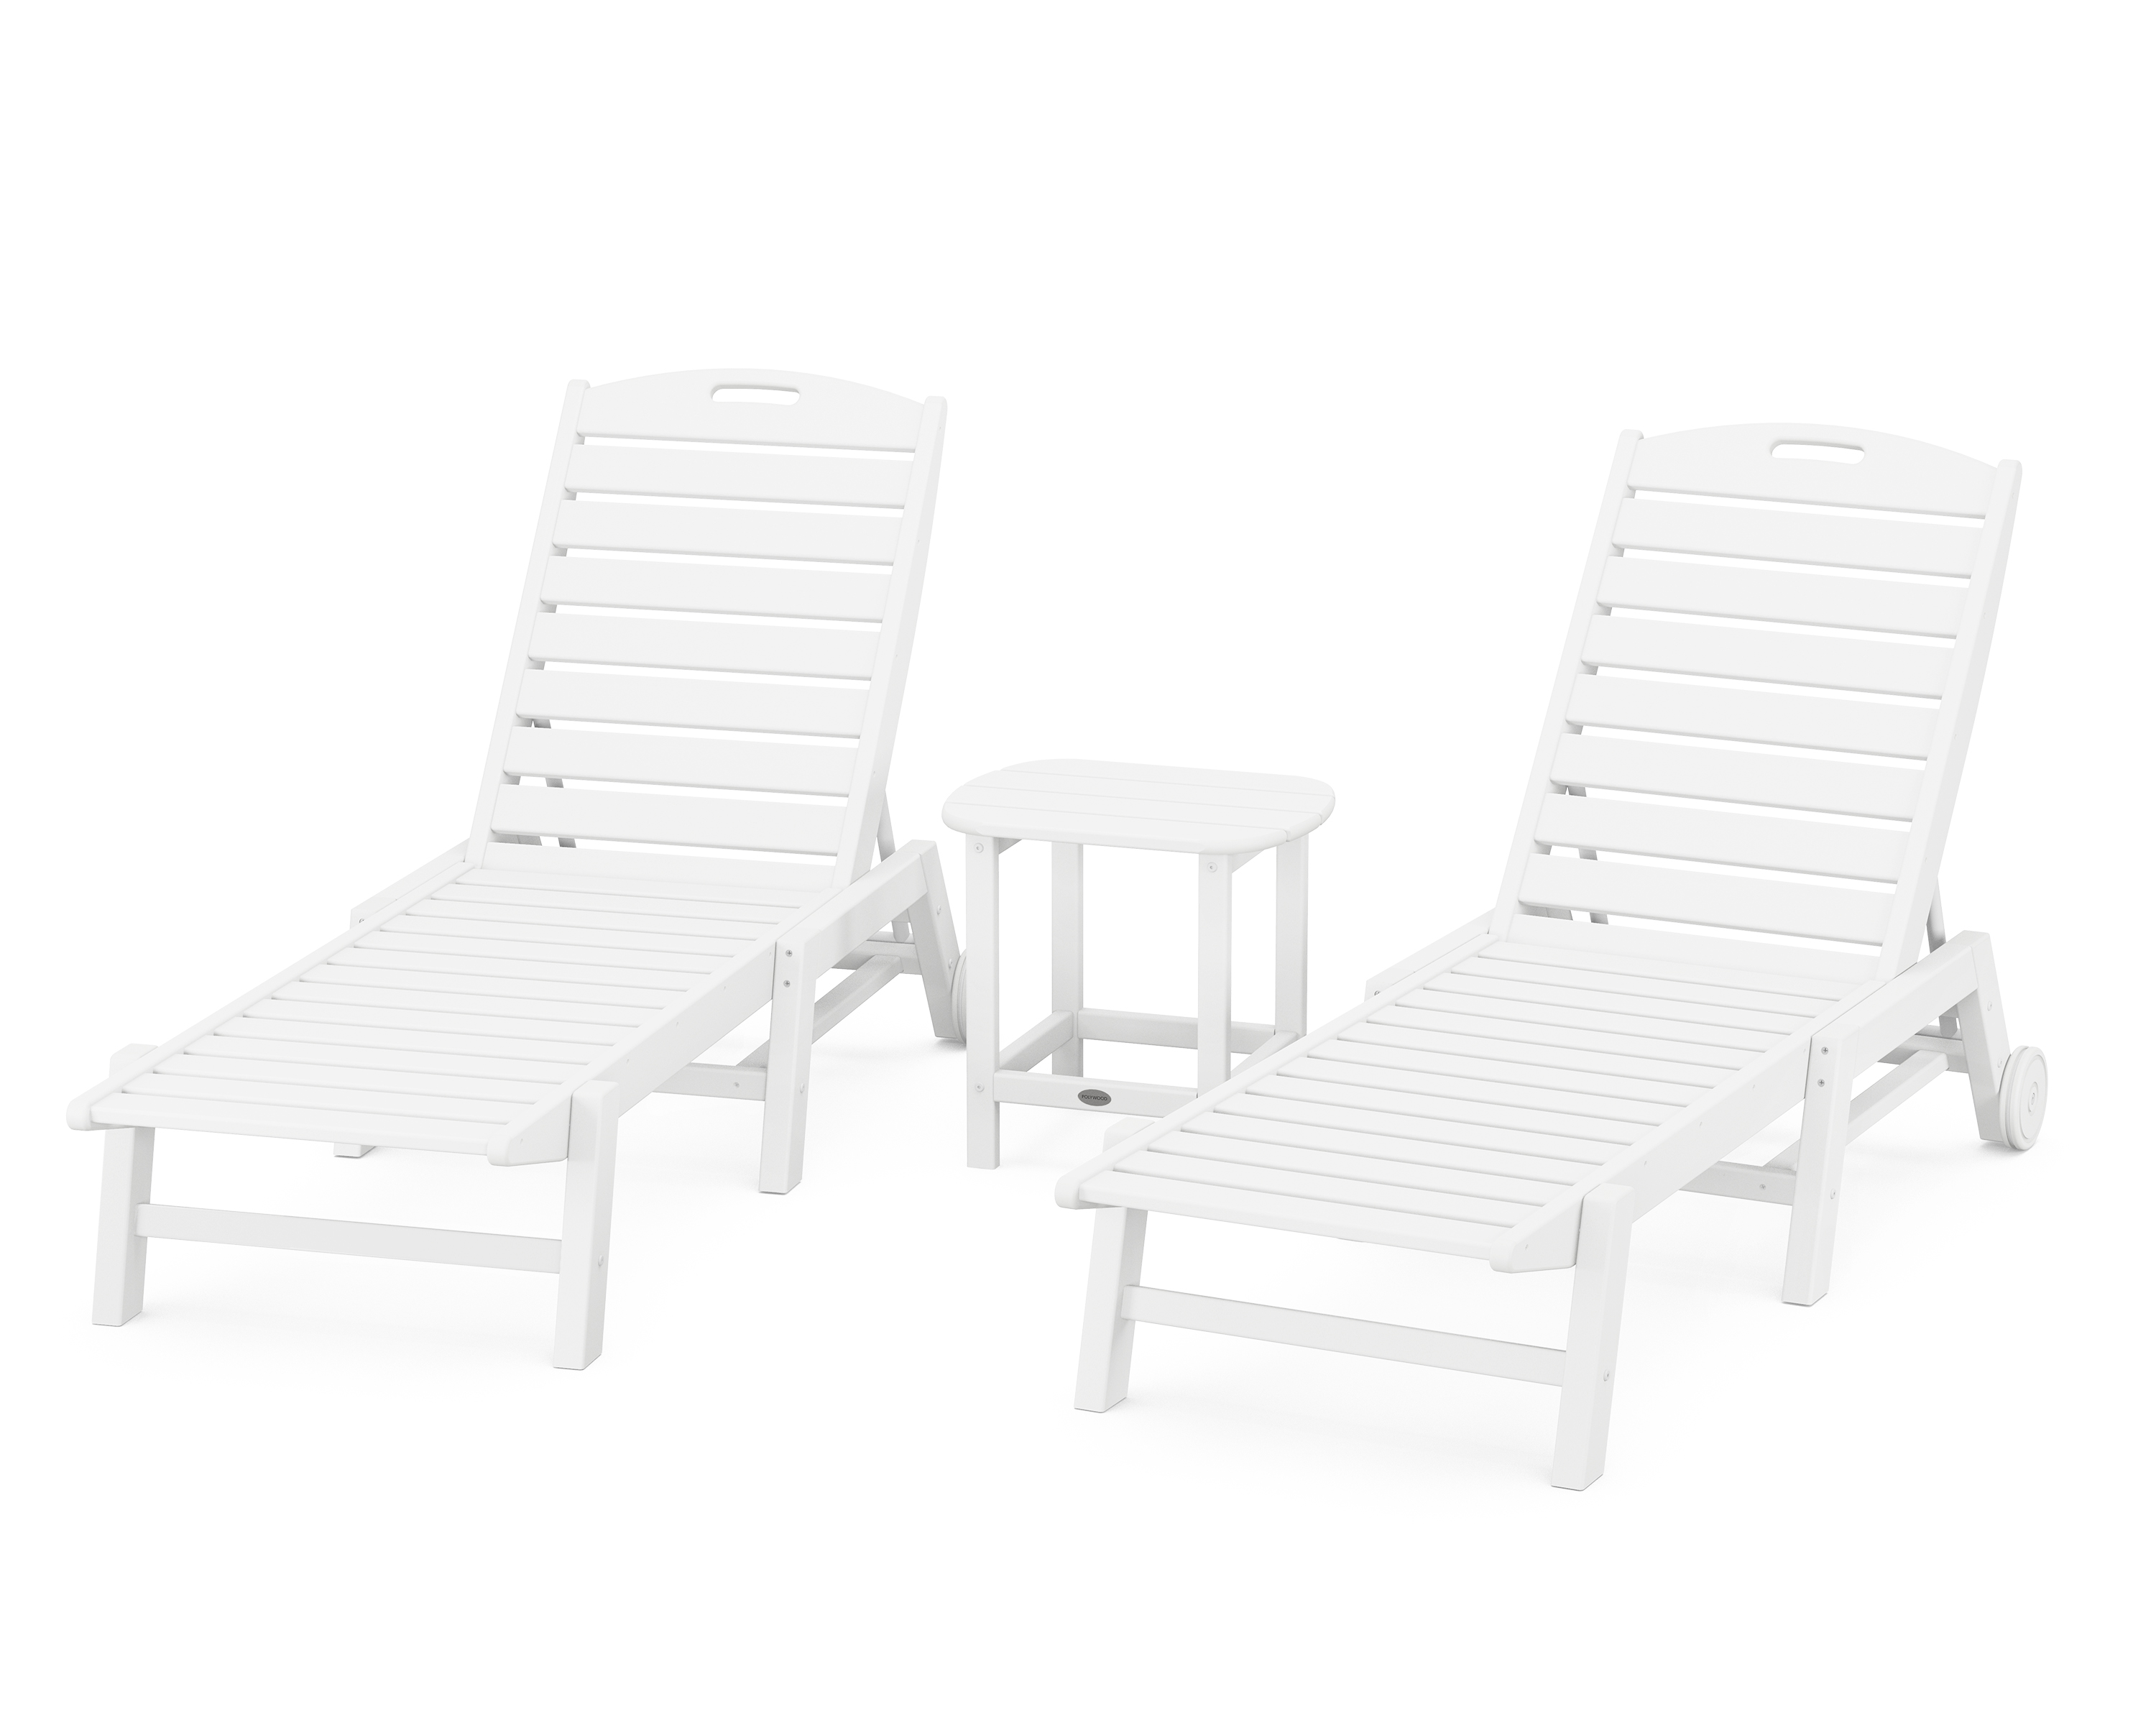 POLYWOOD Nautical 3-Piece Chaise Lounge with Wheels Set with South Beach 18" Side Table in White - image 1 of 1